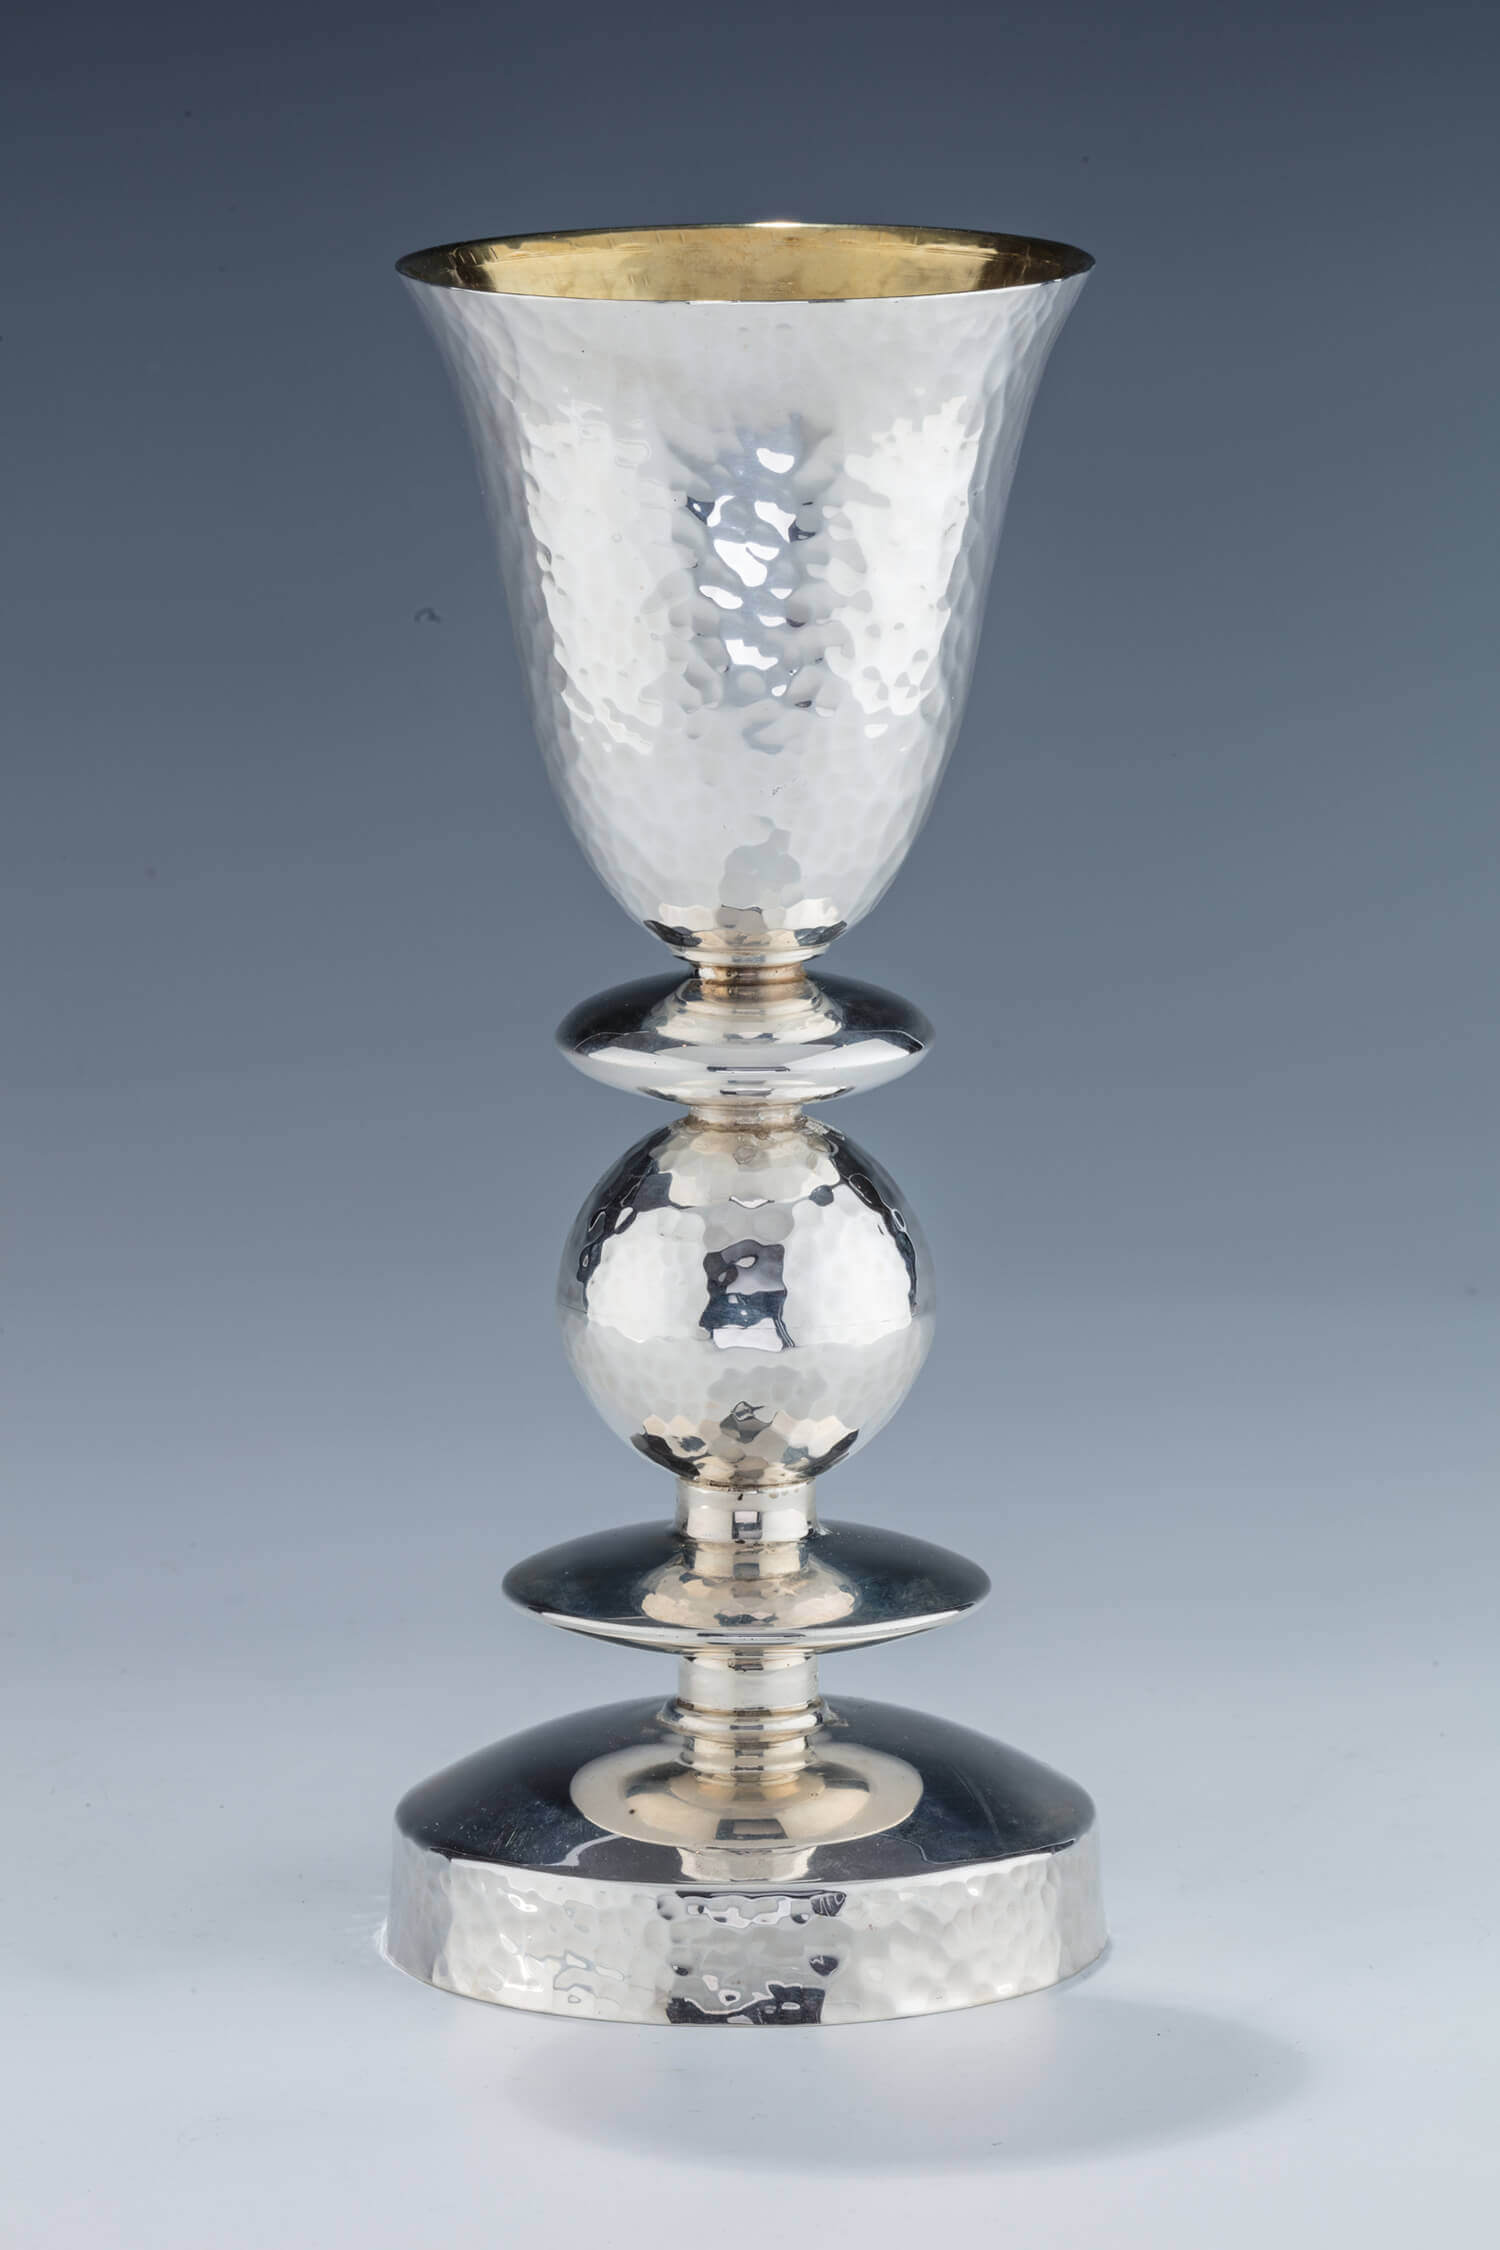 131. A MONUMENTAL STERLING SILVER KIDDUSH CUP BY BIER